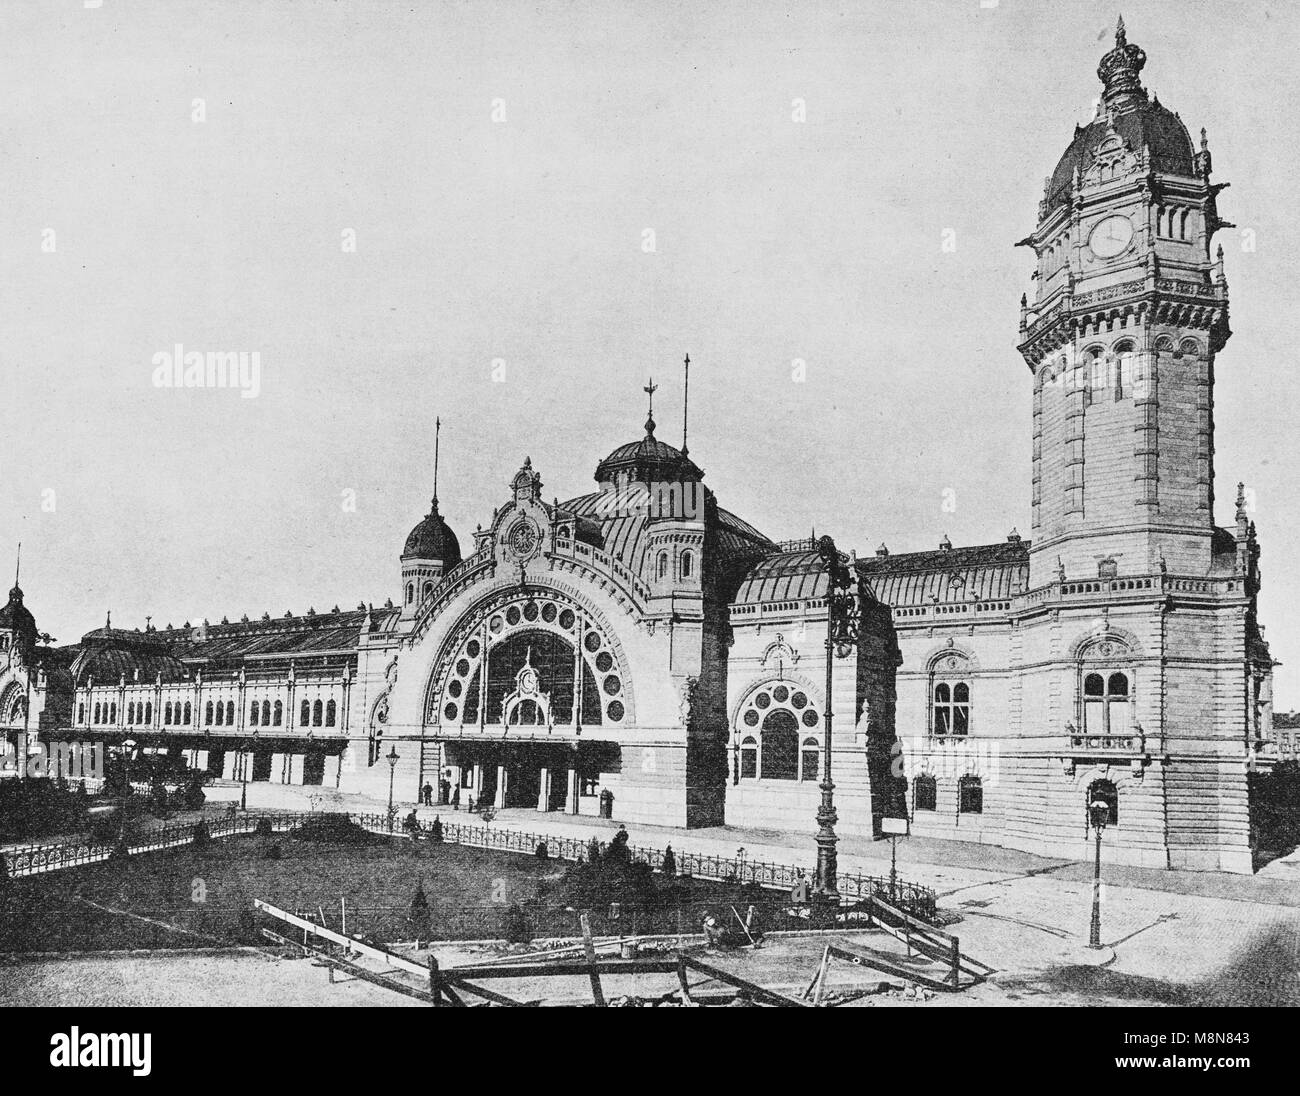 Cologne Railway Station in 1900, Picture from the French weekly newspaper l'Illustration, 17th November 1900 Stock Photo